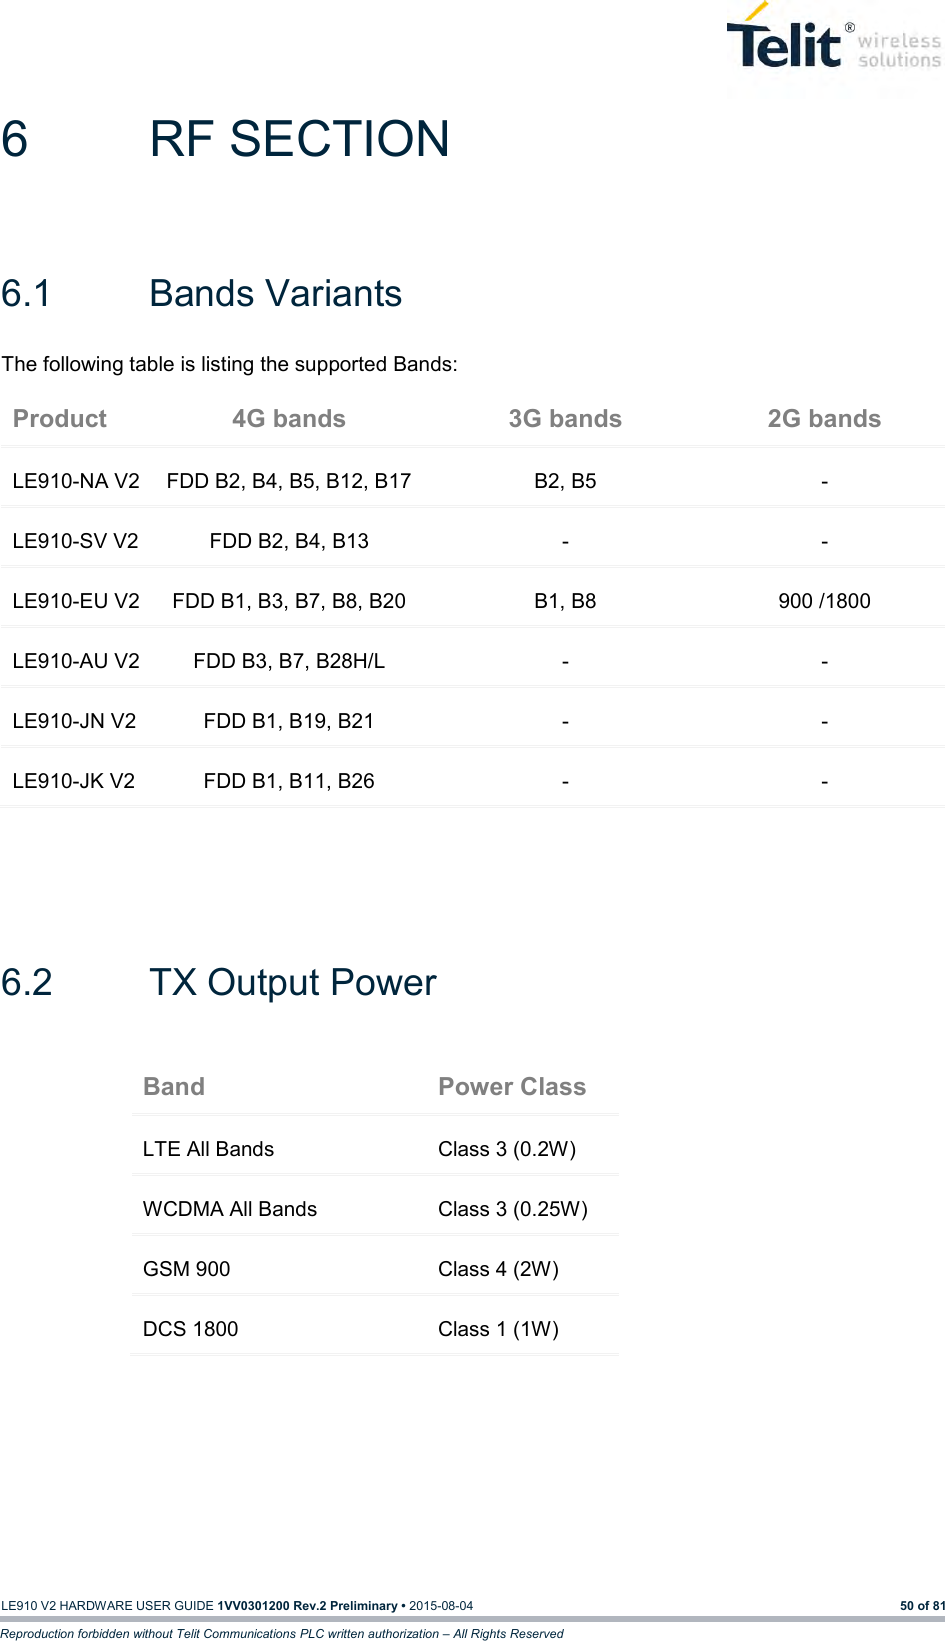   LE910 V2 HARDWARE USER GUIDE 1VV0301200 Rev.2 Preliminary • 2015-08-04 50 of 81 Reproduction forbidden without Telit Communications PLC written authorization – All Rights Reserved 6  RF SECTION 6.1  Bands Variants The following table is listing the supported Bands:        6.2  TX Output Power           Product 4G bands 3G bands 2G bands LE910-NA V2 FDD B2, B4, B5, B12, B17 B2, B5 - LE910-SV V2 FDD B2, B4, B13 - - LE910-EU V2 FDD B1, B3, B7, B8, B20 B1, B8 900 /1800 LE910-AU V2 FDD B3, B7, B28H/L - - LE910-JN V2 FDD B1, B19, B21 - - LE910-JK V2 FDD B1, B11, B26 - - Band Power Class LTE All Bands Class 3 (0.2W) WCDMA All Bands Class 3 (0.25W) GSM 900 Class 4 (2W) DCS 1800 Class 1 (1W) 